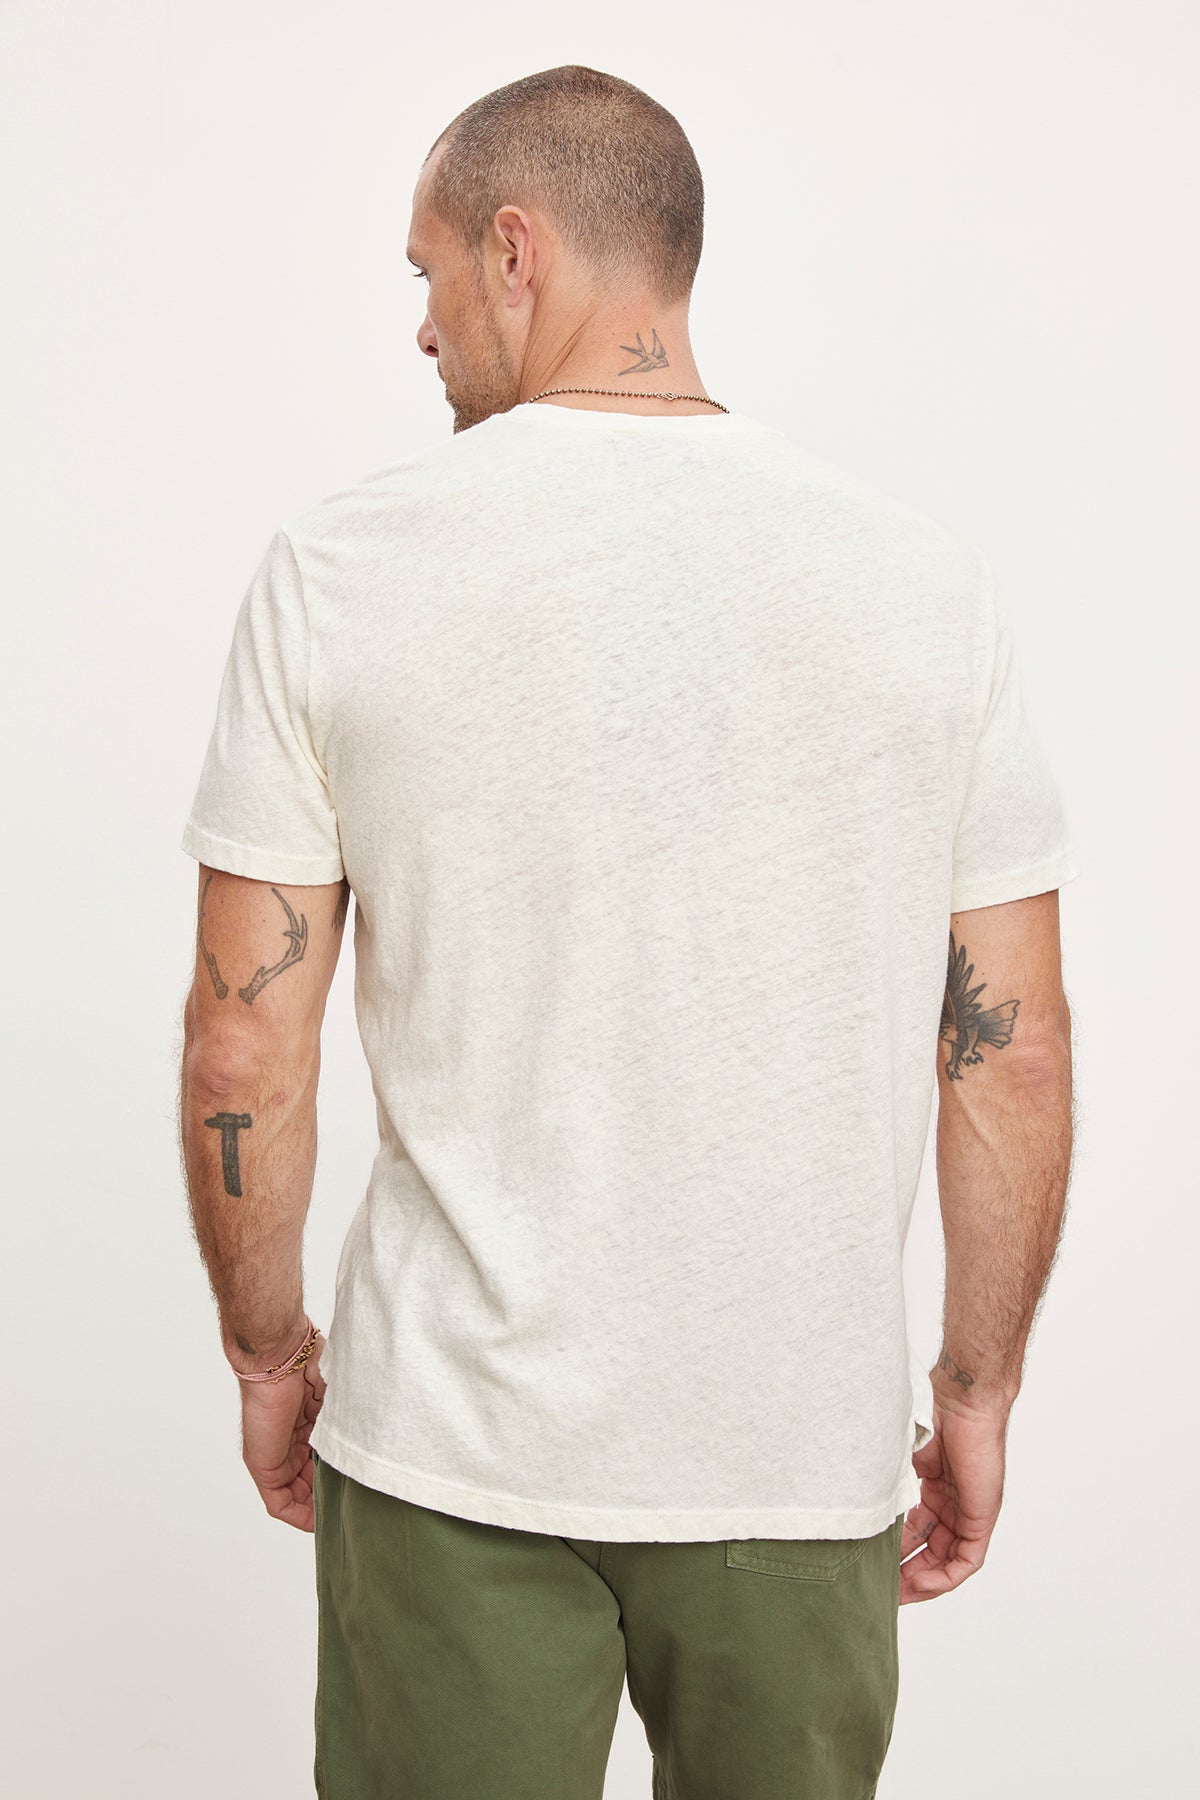 Man standing with back to the camera, showcasing various tattoos on his arms and neck, wearing a white Velvet by Graham & Spencer henley style t-shirt and green trousers.-36753589207233